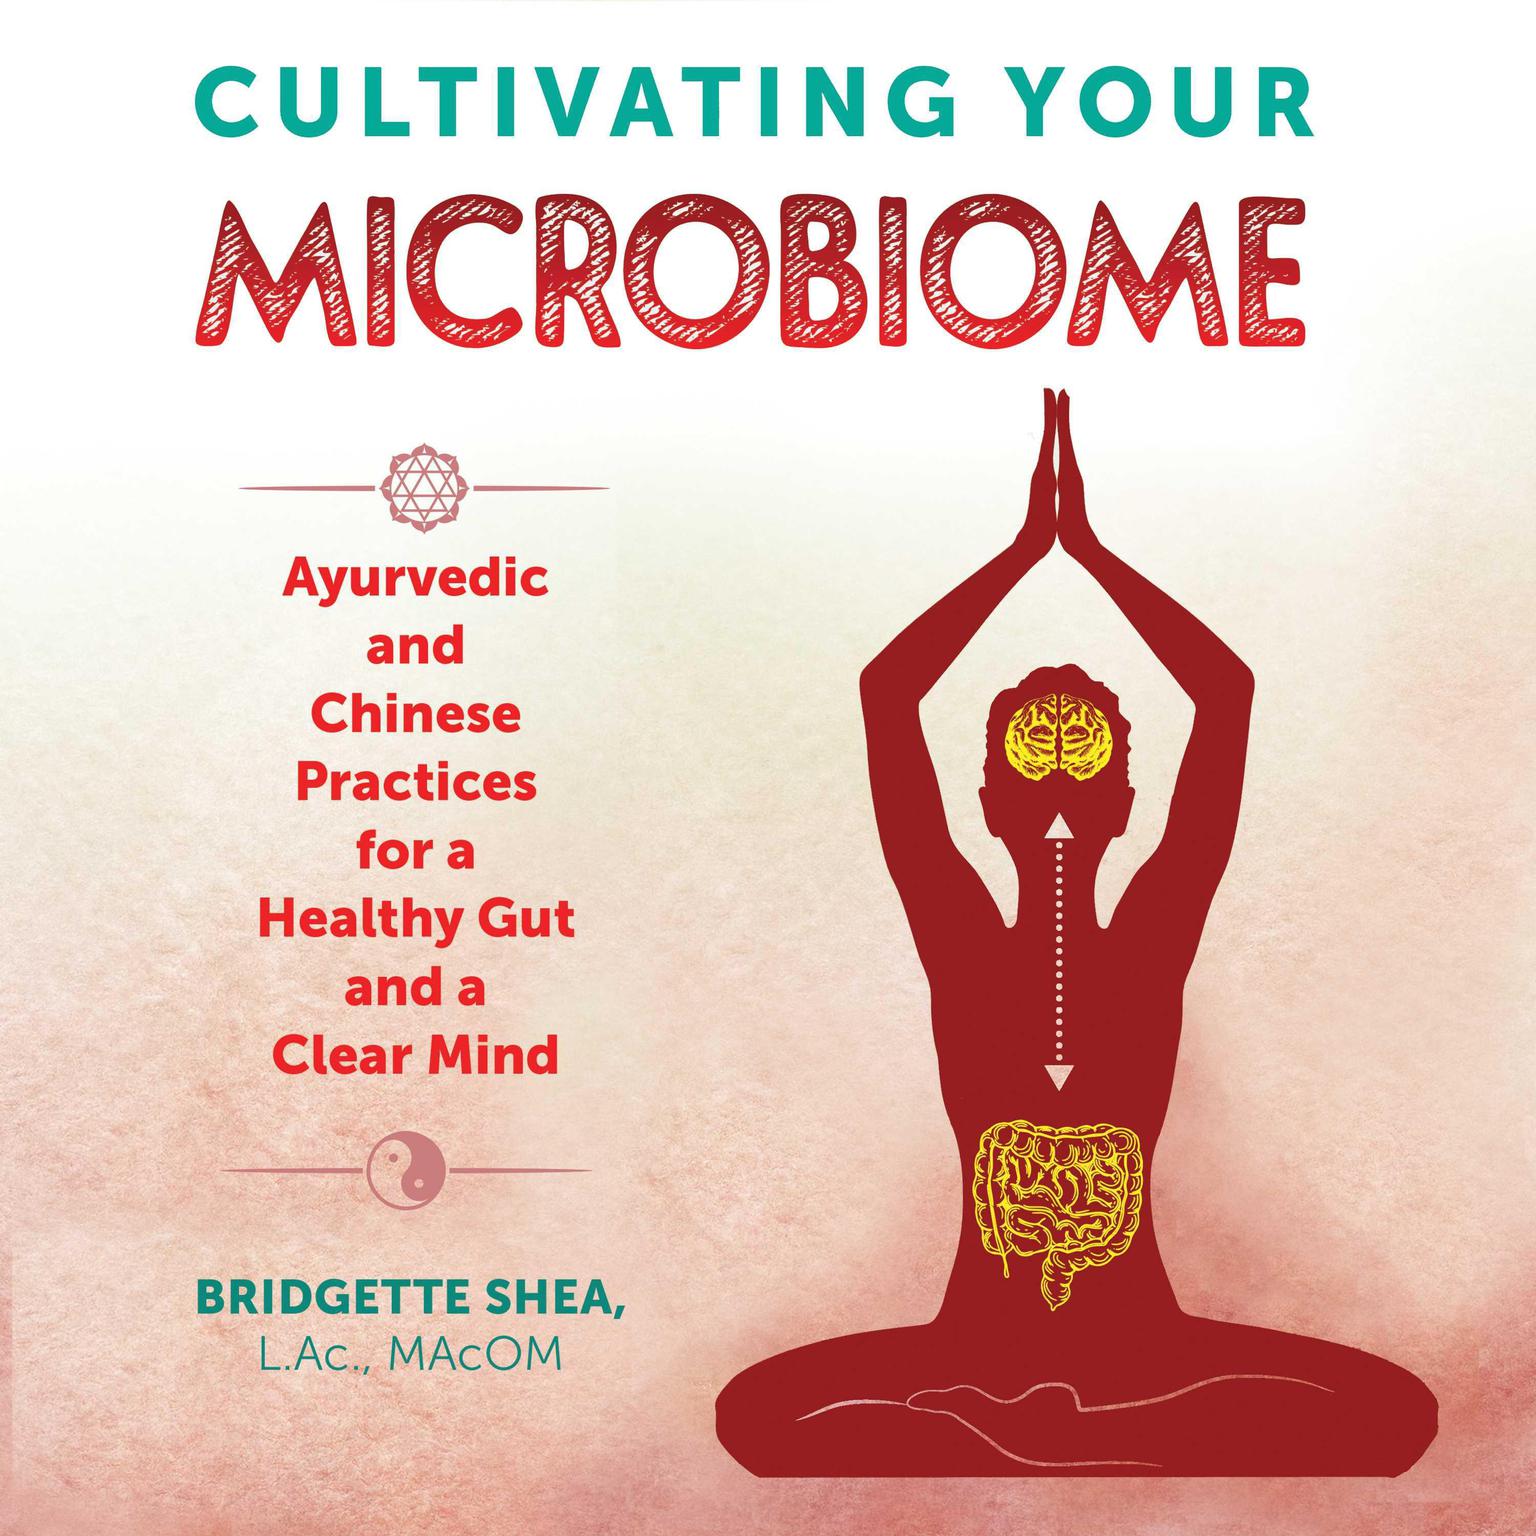 Cultivating Your Microbiome: Ayurvedic and Chinese Practices for a Healthy Gut and a Clear Mind Audiobook, by Bridgette Shea